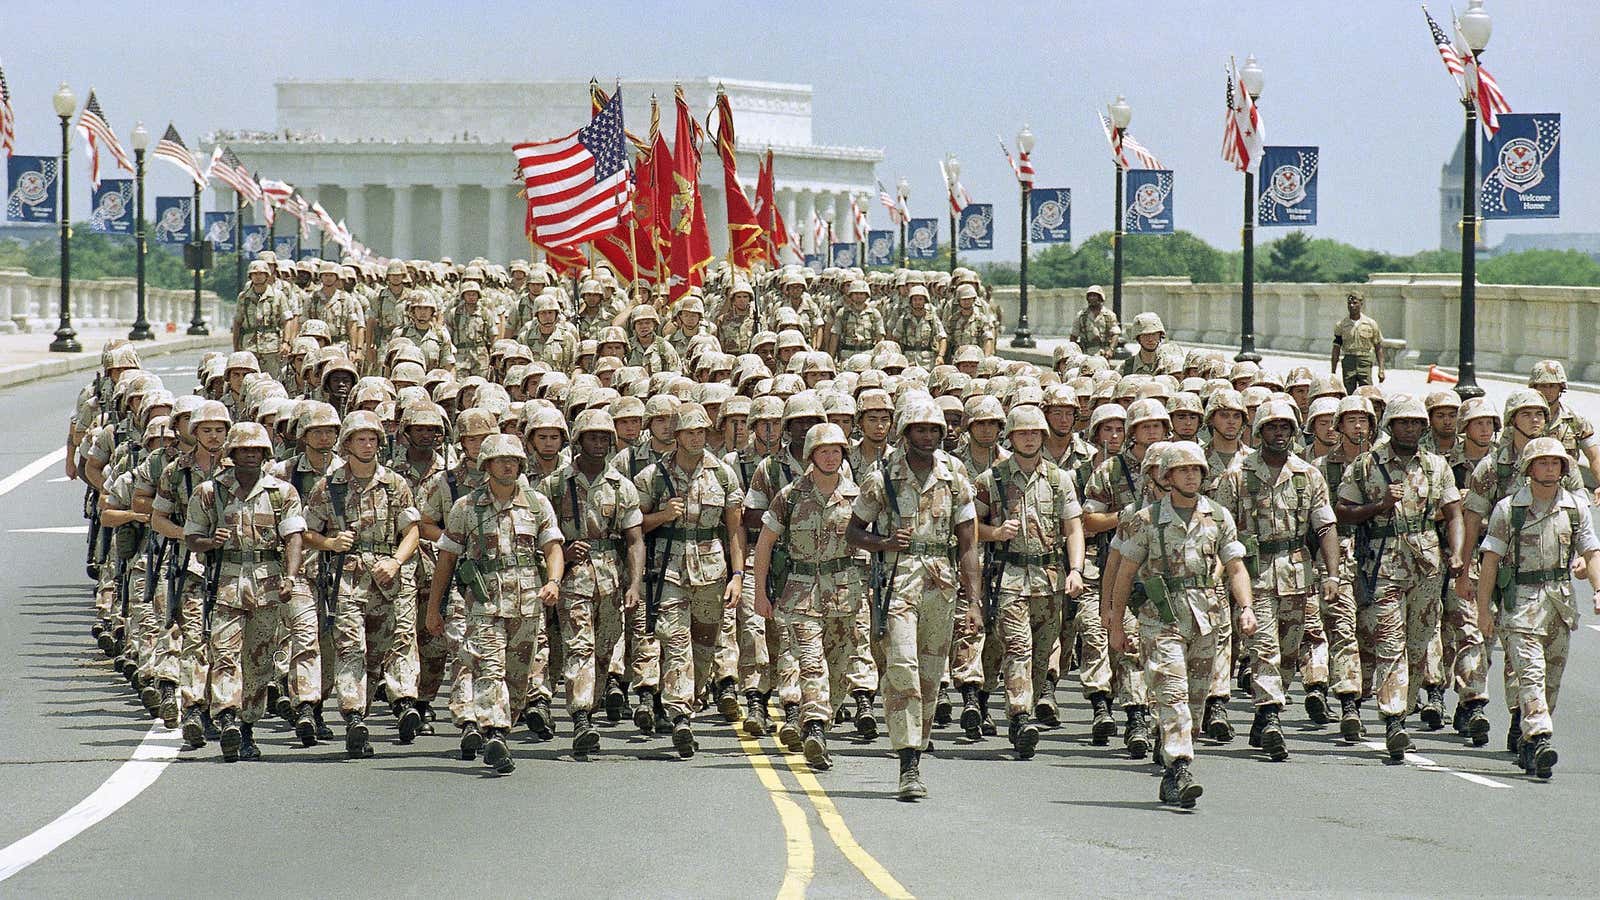 The “National Victory Celebration” parade” held after the Persian Gulf War in 1991.